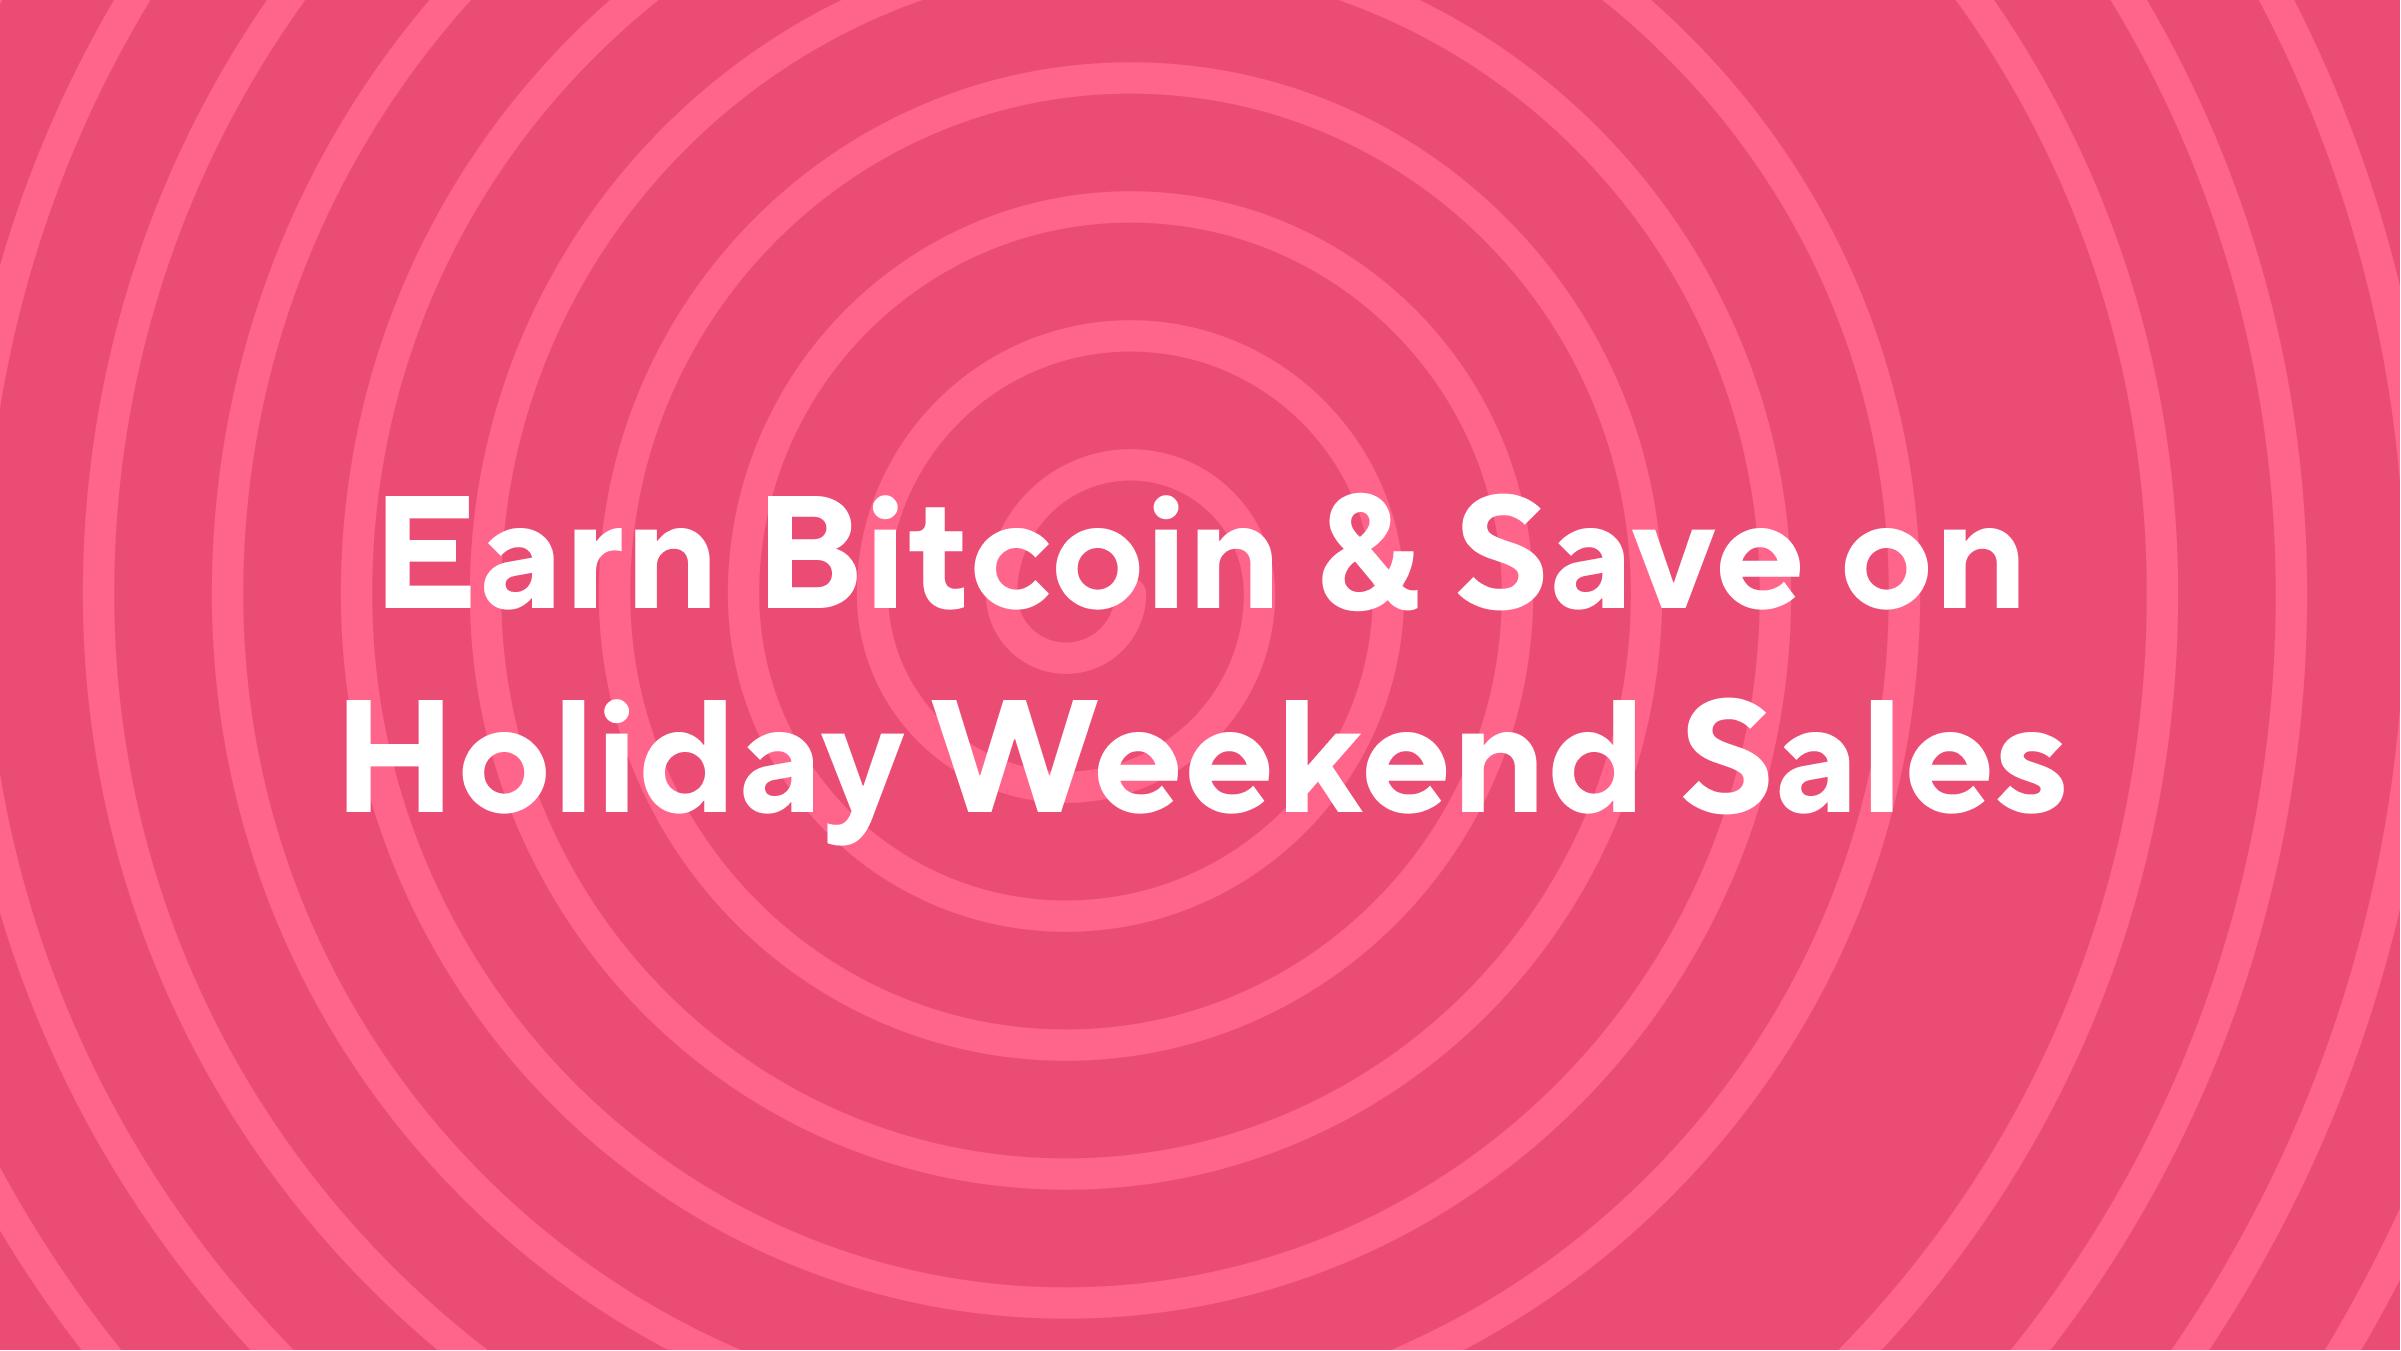 The Long Weekend Came Early. Earn Bitcoin & Save at Top Sales of Labor Day Weekend!